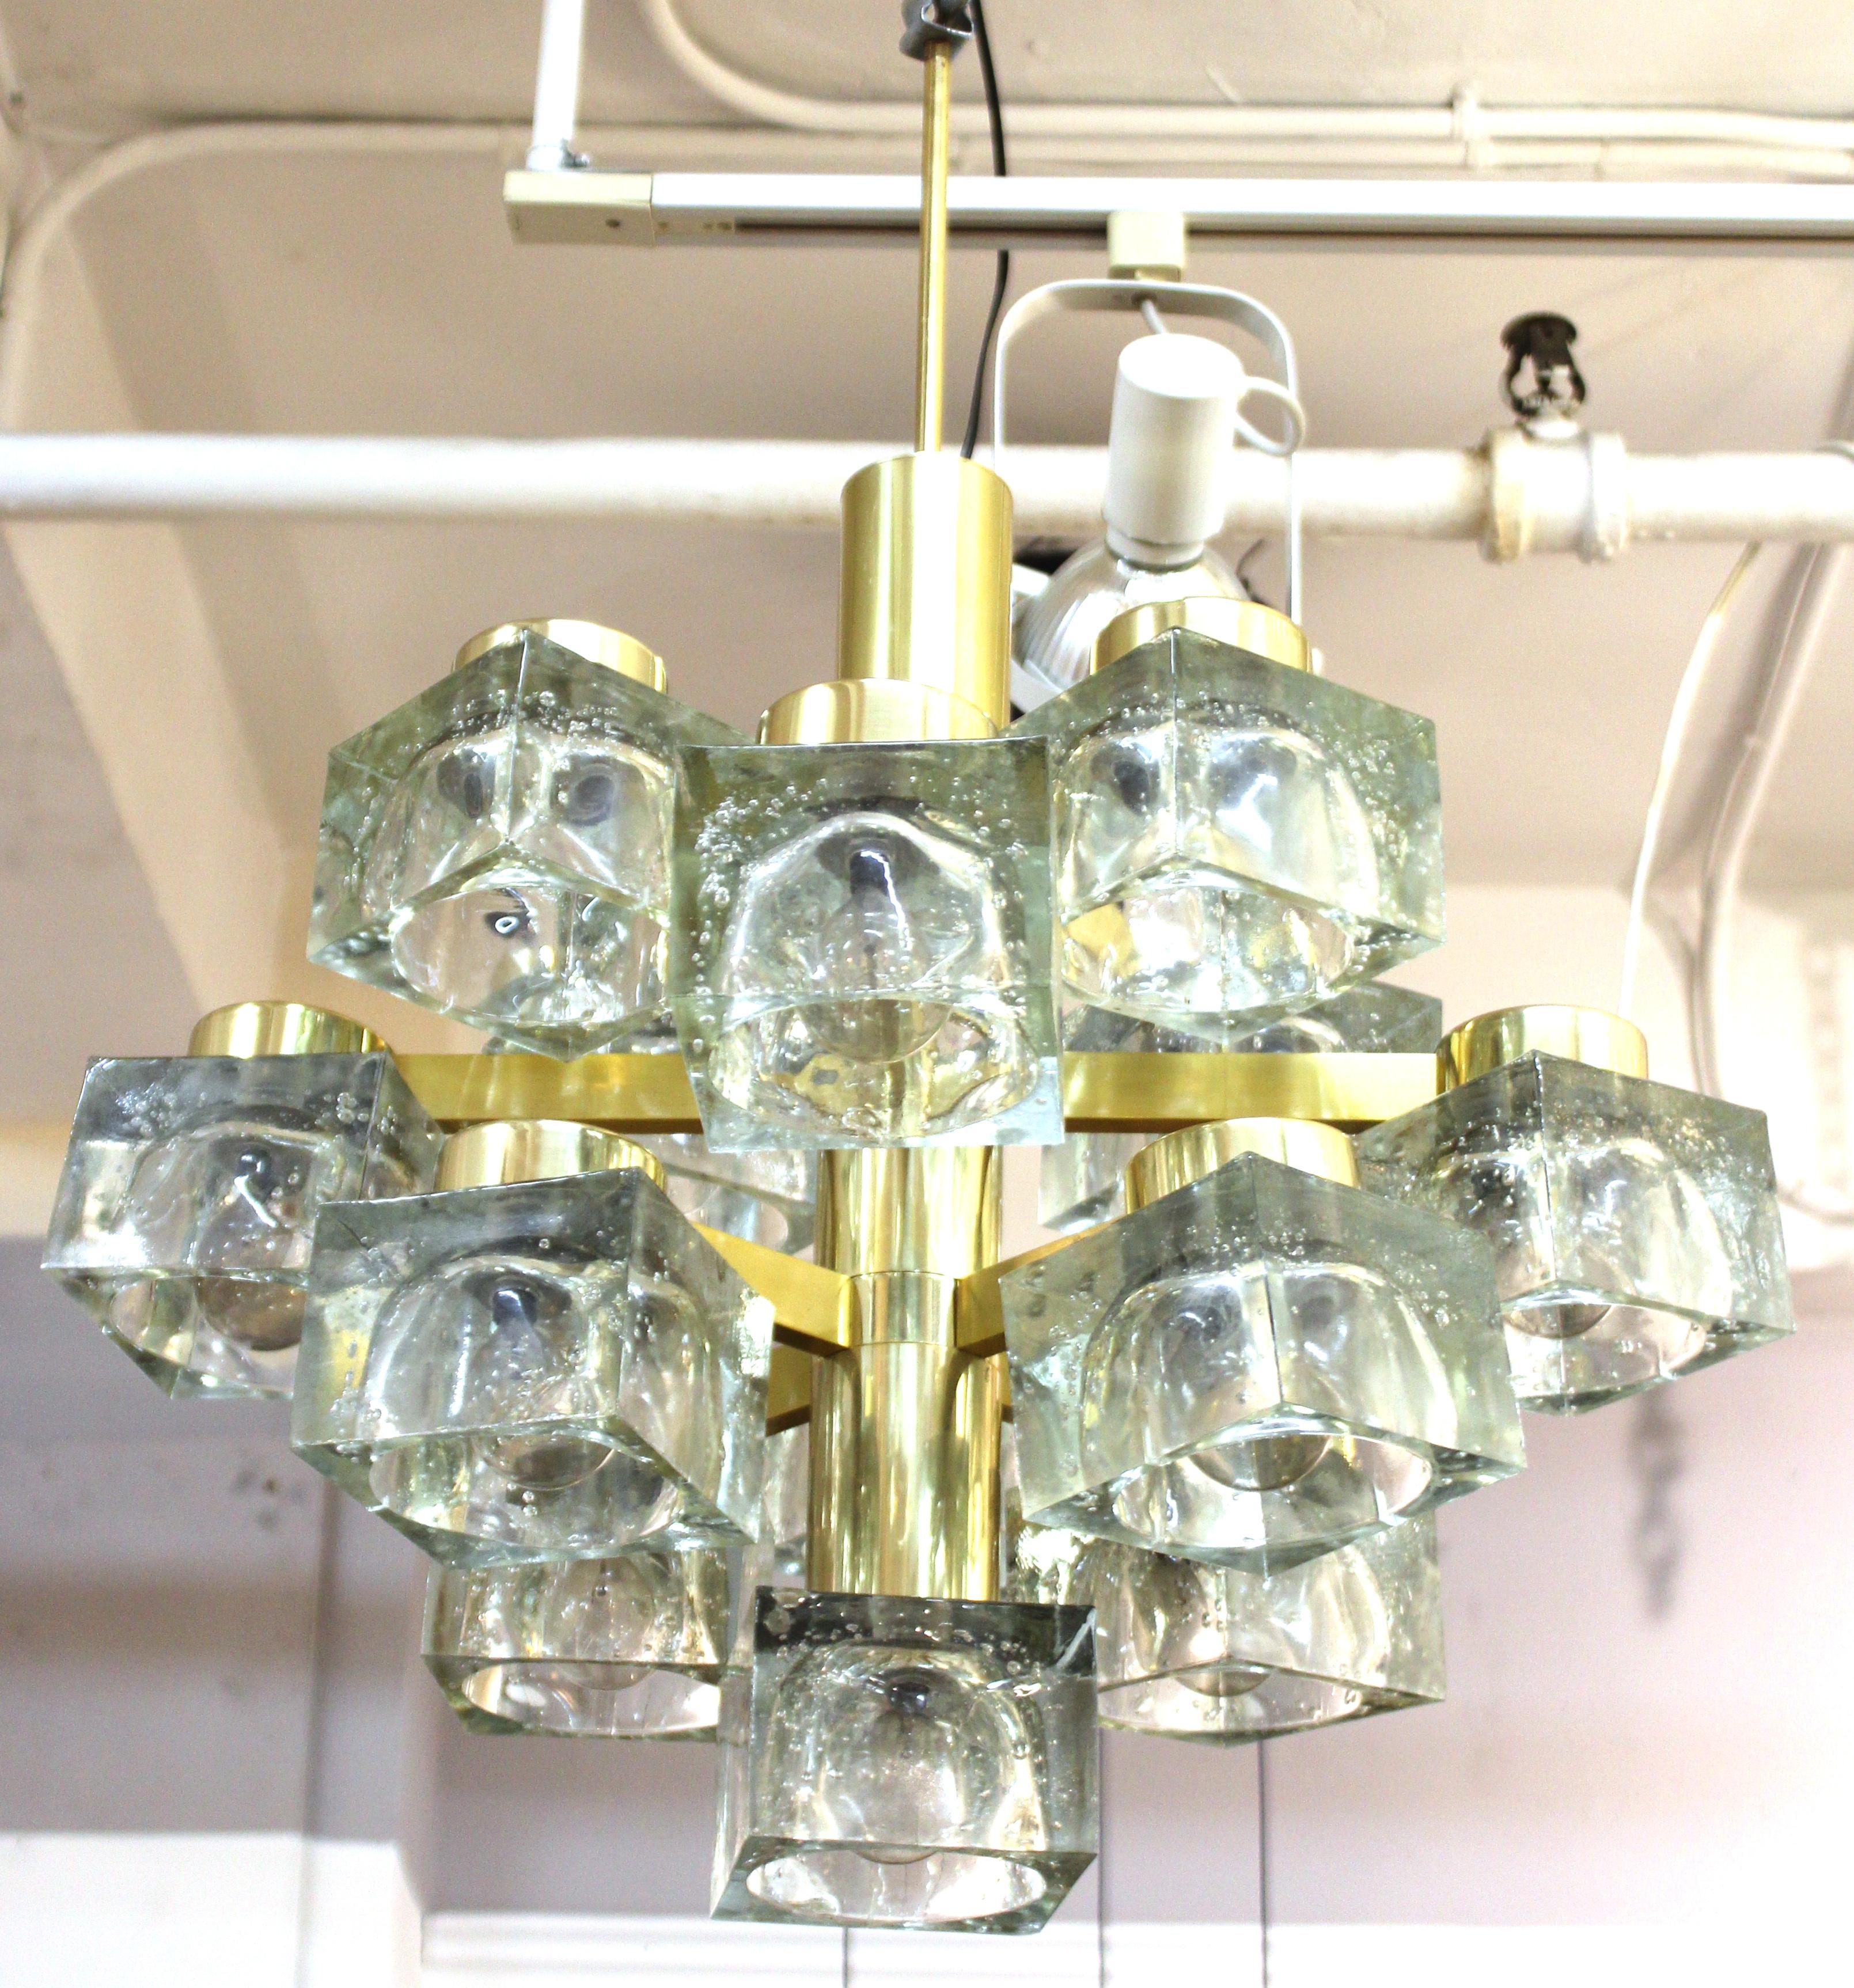 Italian modern heavy frosted glass cube chandelier designed by Gaetano Sciolari for Lightolier. The piece has multiple levels of frosted glass cubes on a brass structure. Designed in Italy in the 1970s, this piece is in great vintage condition.